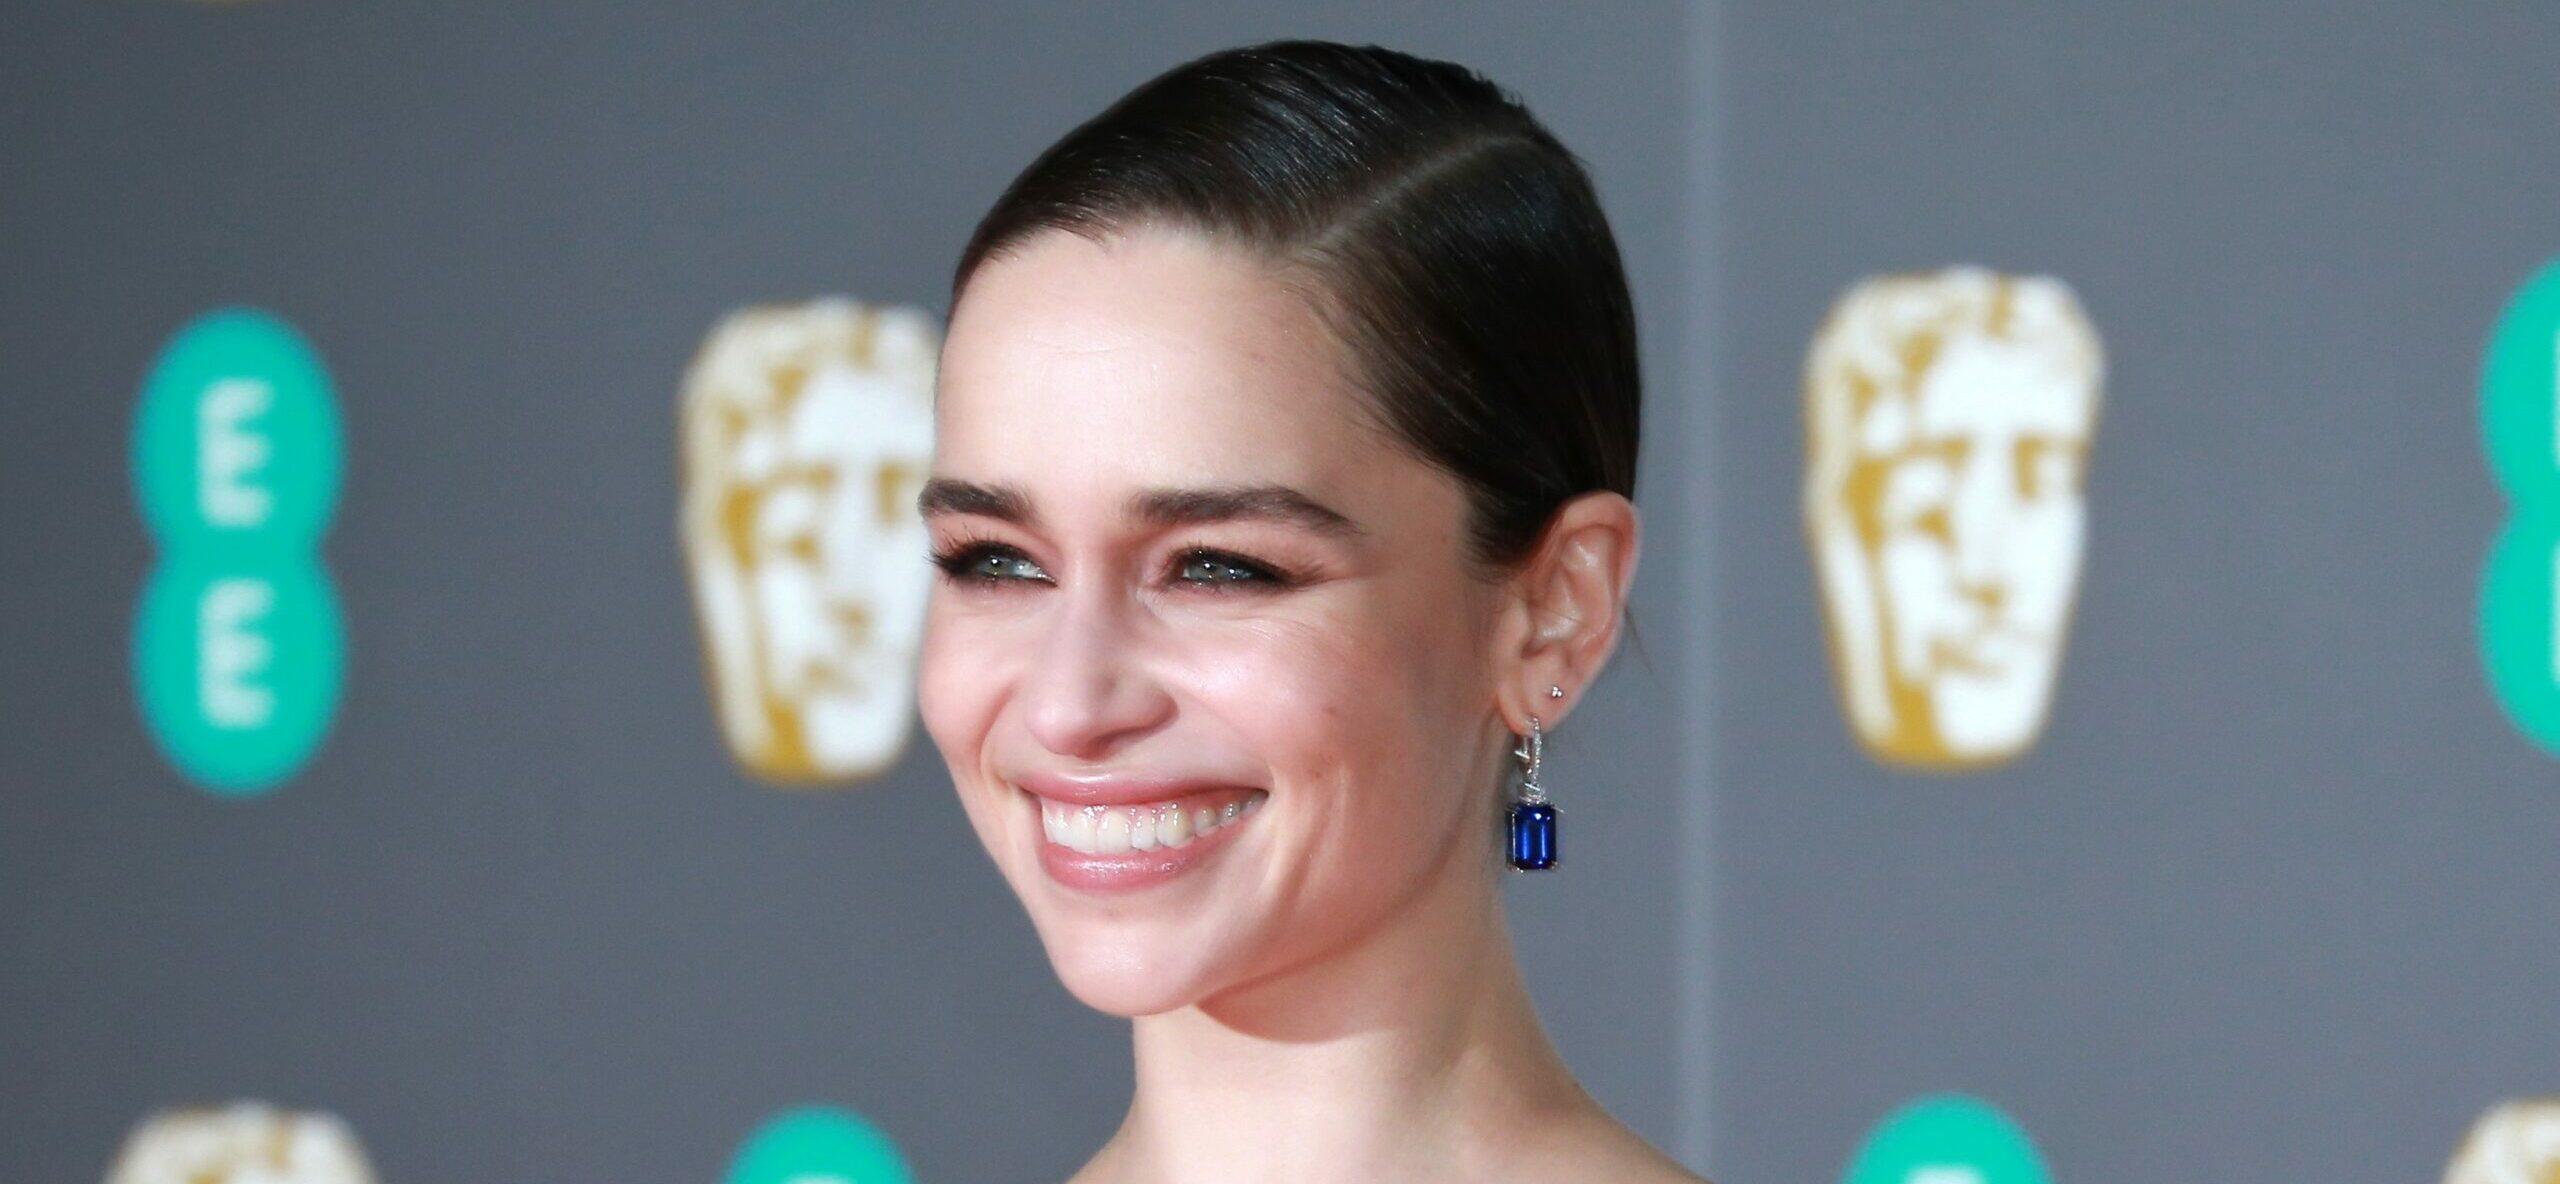 Emilia Clarke at the 73rd British Academy Film Awards in London.